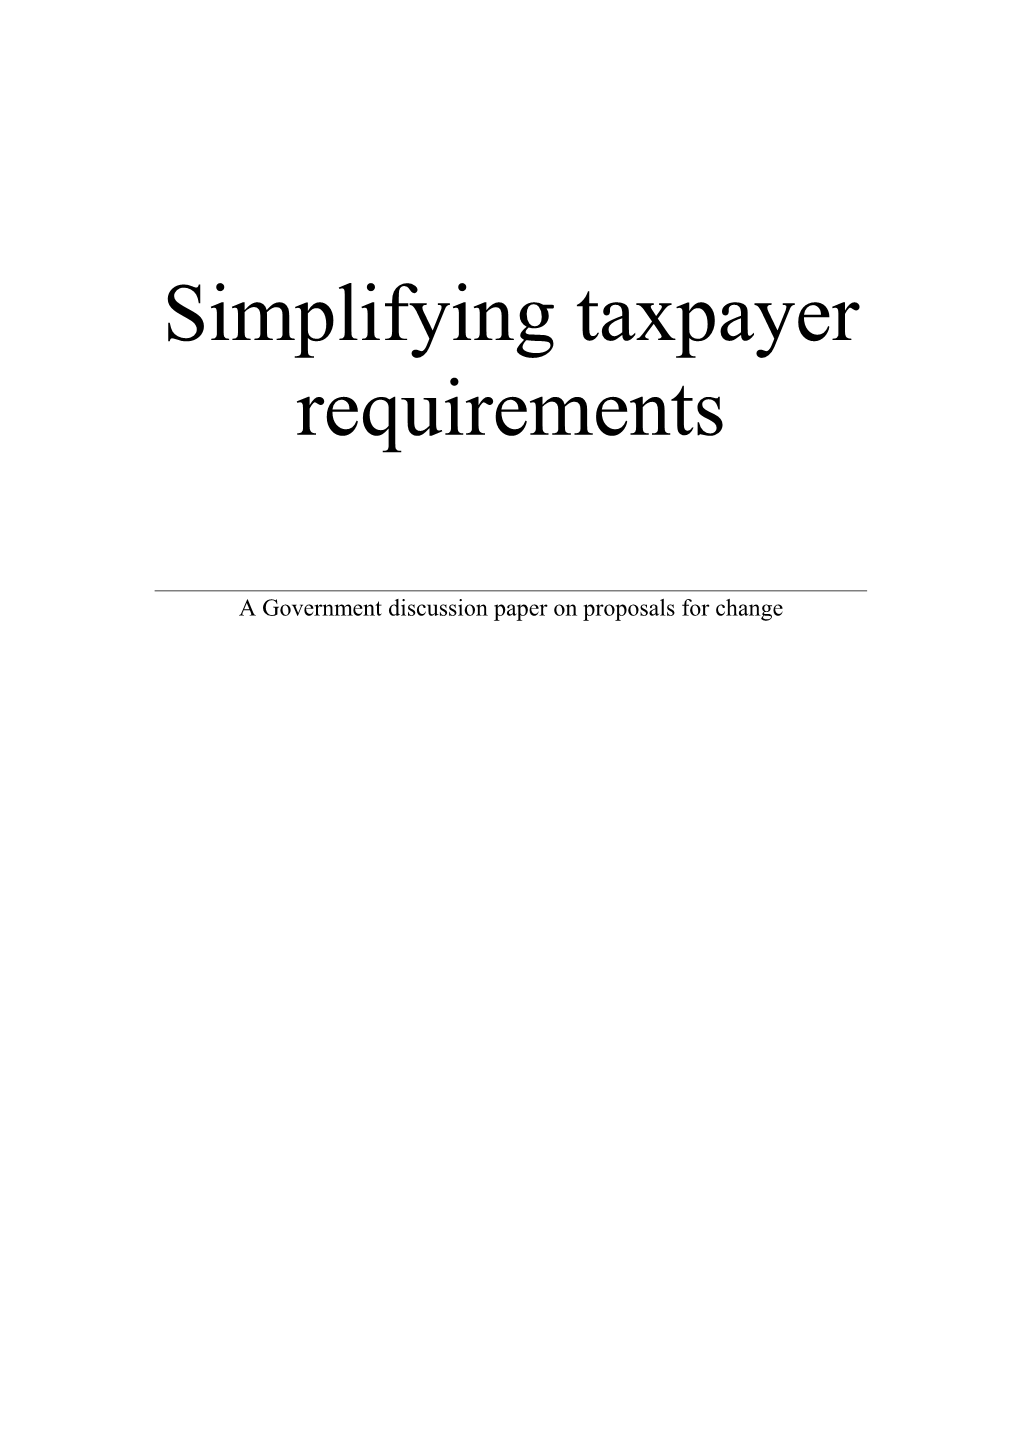 Simplifying Taxpayer Requirements